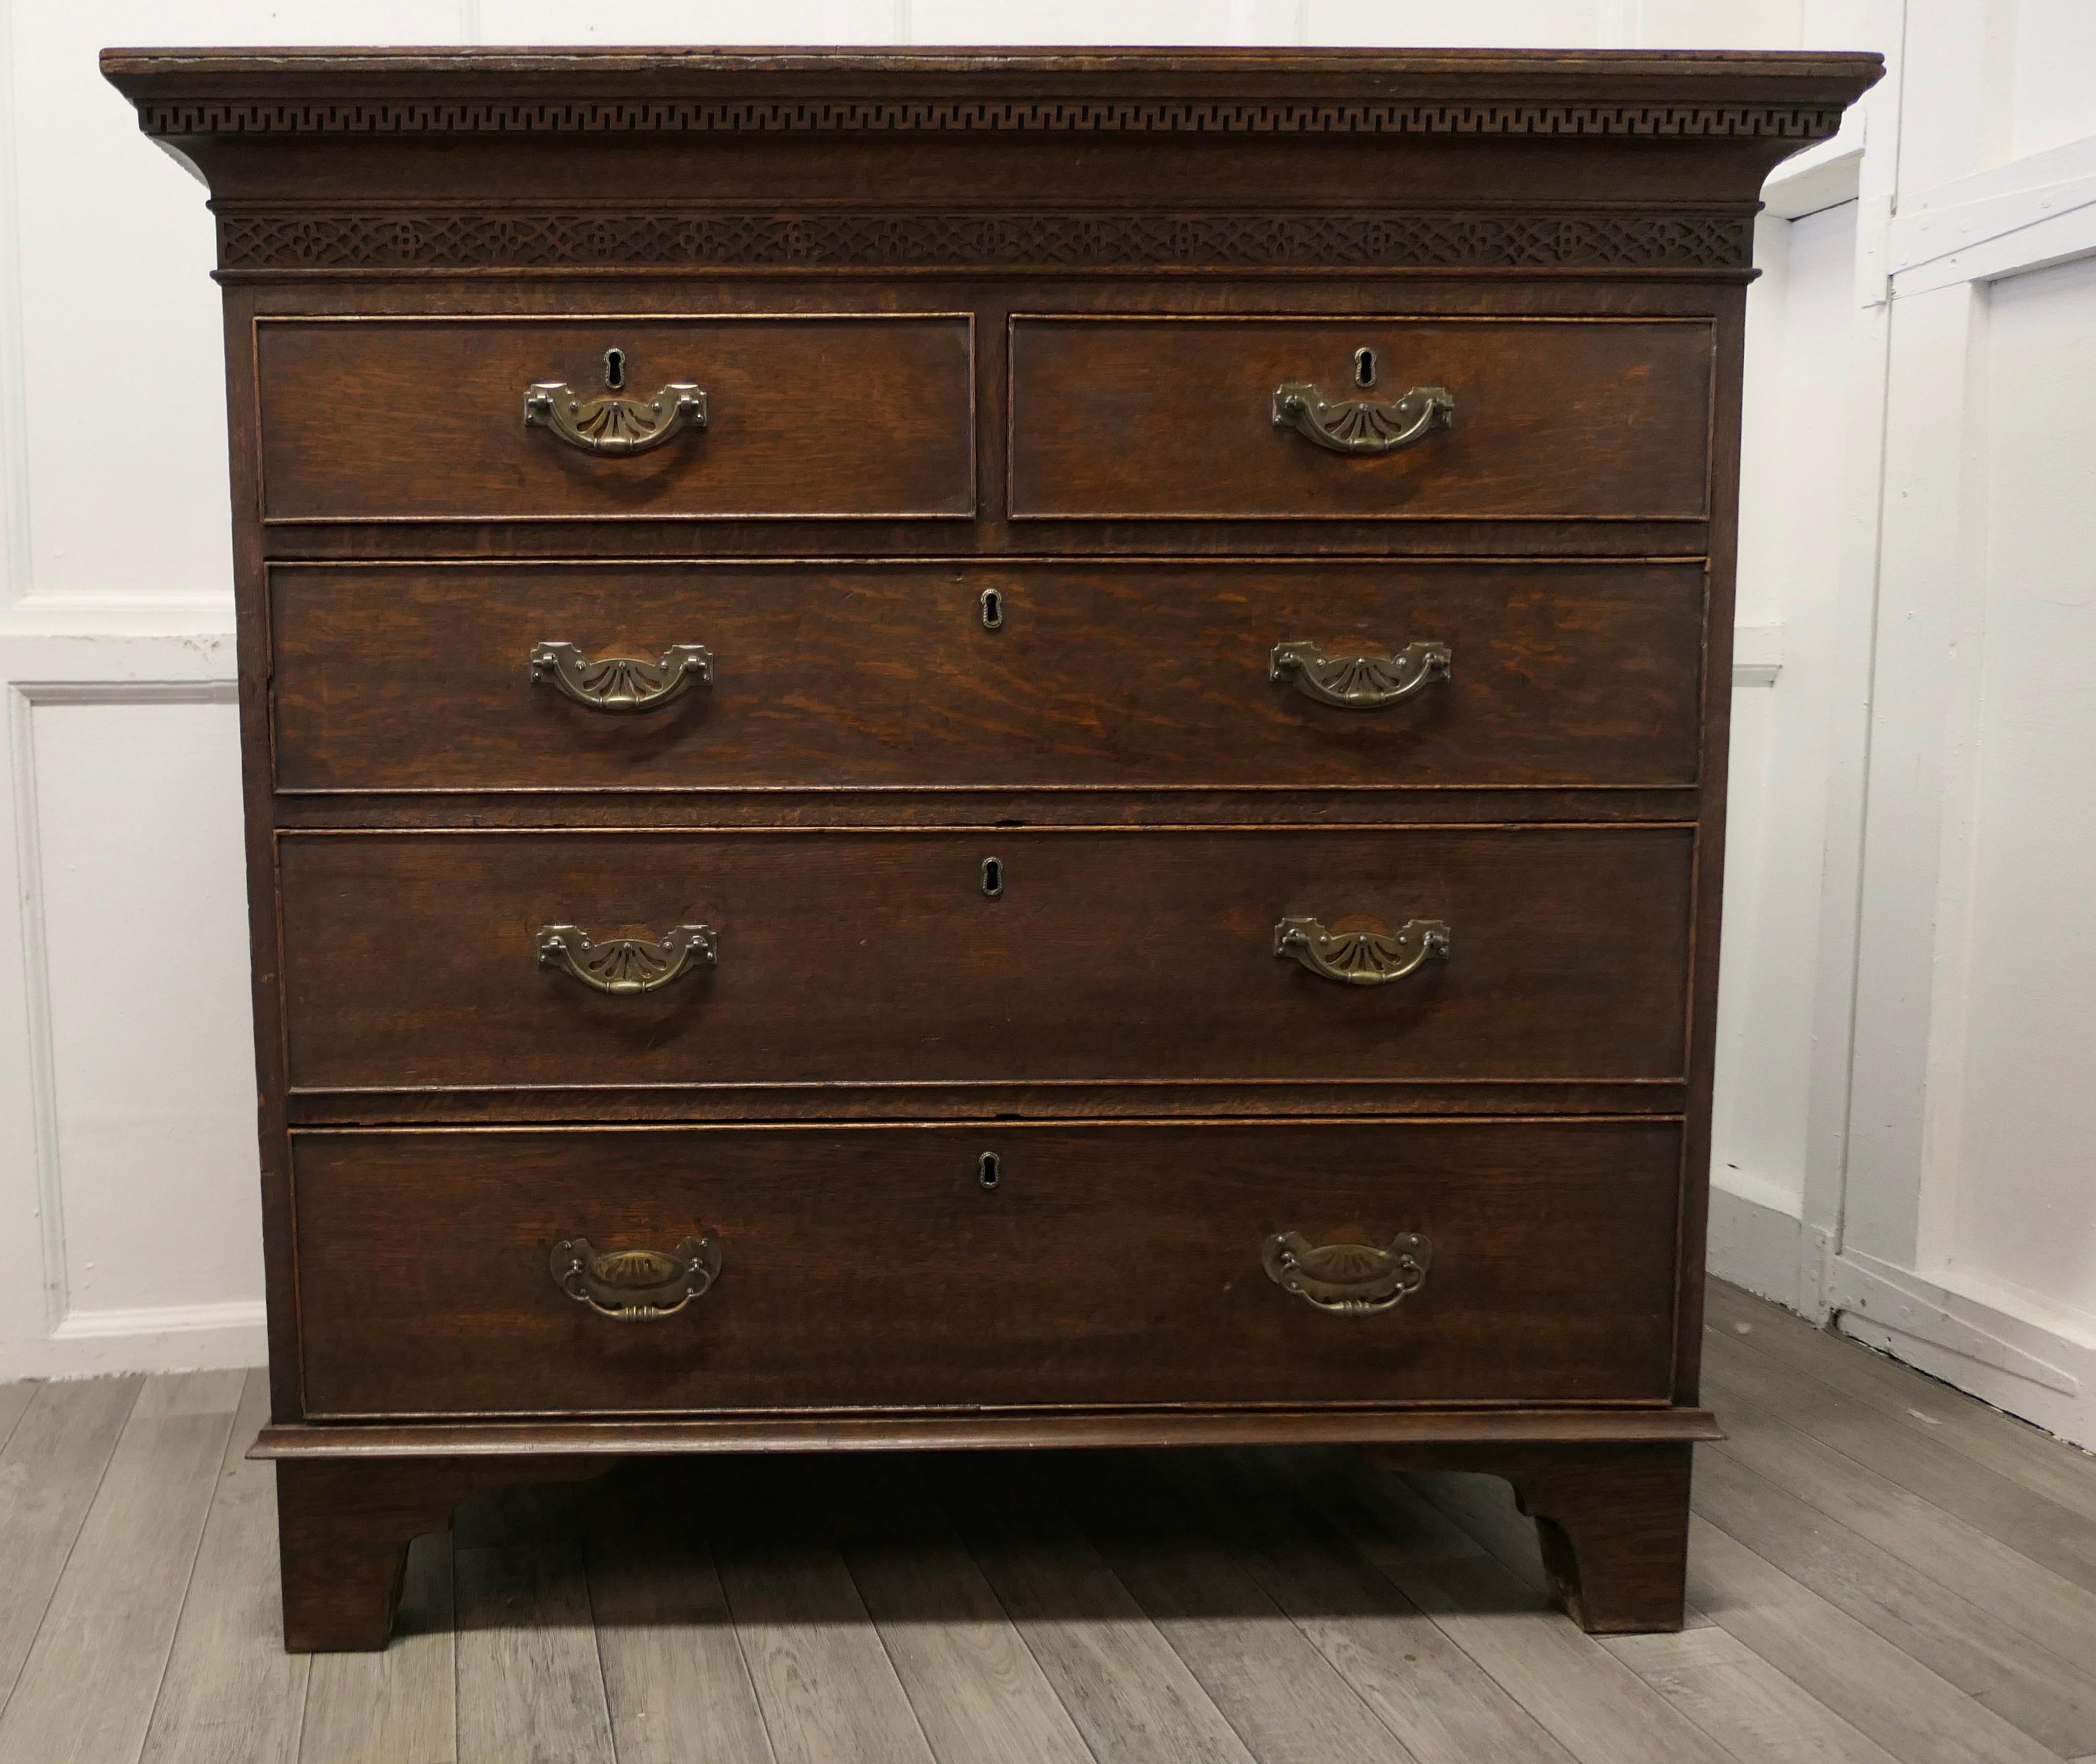 A large oak chest of drawers

This very attractive chest has two short drawers at the top and three graduated long drawers beneath, this is a heavy chest of drawers, it stands on a Bracket Footed Plinth and it has a solid oak top with an